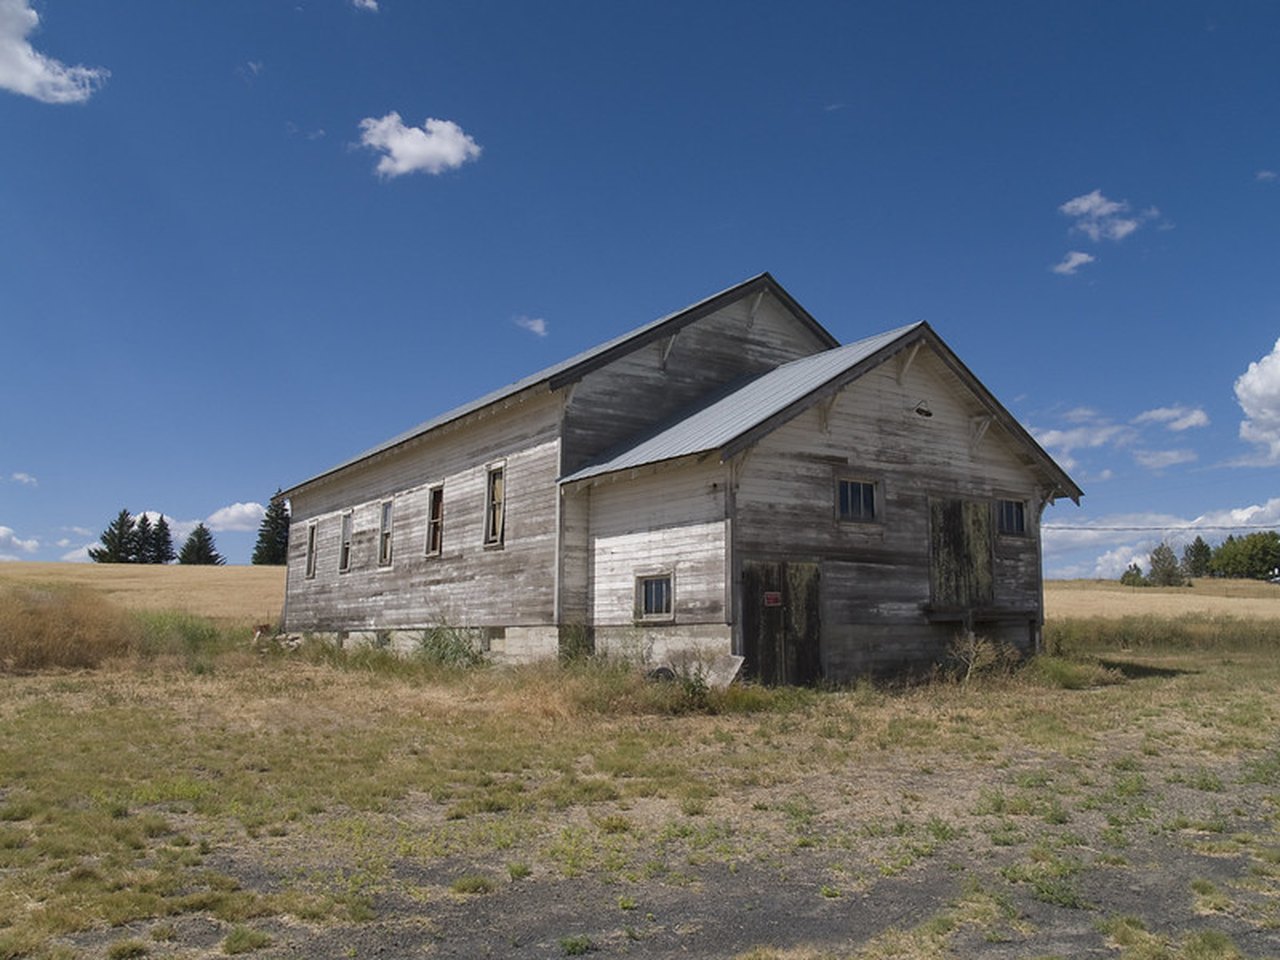 8 Ghost Towns In Washington Sure To Give You The Creeps 1750